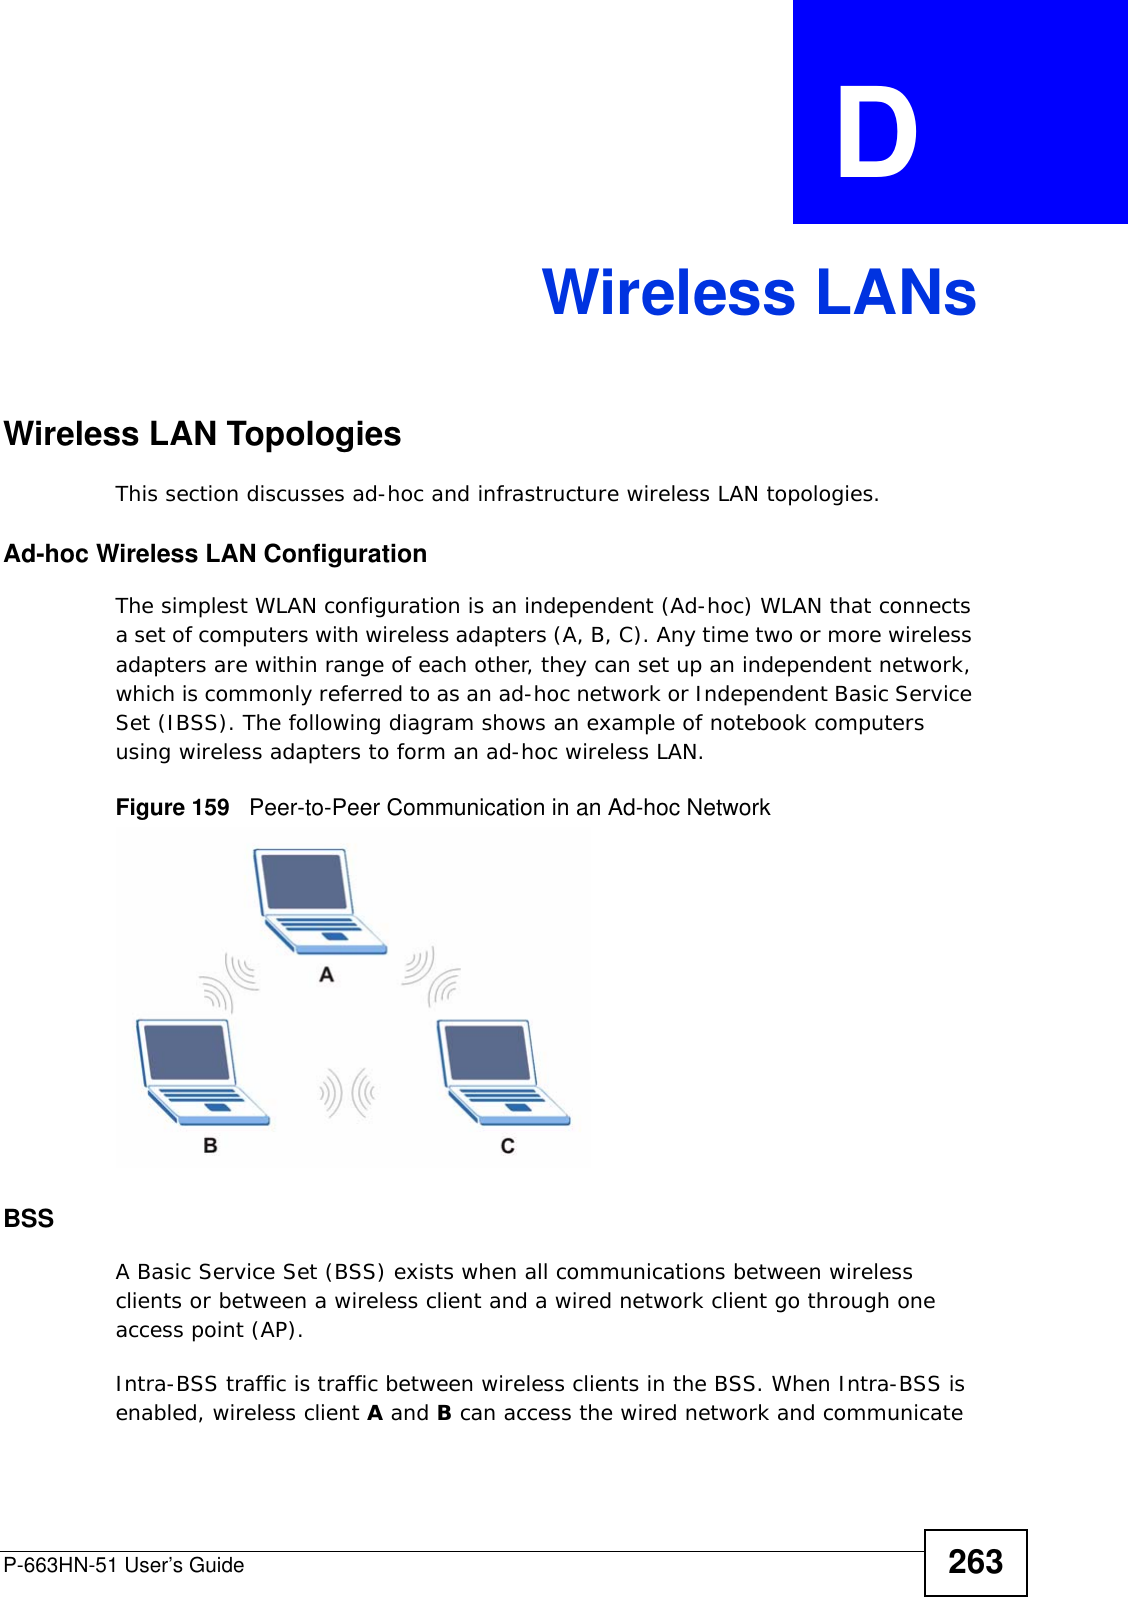 P-663HN-51 User’s Guide 263APPENDIX  D Wireless LANsWireless LAN TopologiesThis section discusses ad-hoc and infrastructure wireless LAN topologies.Ad-hoc Wireless LAN ConfigurationThe simplest WLAN configuration is an independent (Ad-hoc) WLAN that connects a set of computers with wireless adapters (A, B, C). Any time two or more wireless adapters are within range of each other, they can set up an independent network, which is commonly referred to as an ad-hoc network or Independent Basic Service Set (IBSS). The following diagram shows an example of notebook computers using wireless adapters to form an ad-hoc wireless LAN. Figure 159   Peer-to-Peer Communication in an Ad-hoc NetworkBSSA Basic Service Set (BSS) exists when all communications between wireless clients or between a wireless client and a wired network client go through one access point (AP). Intra-BSS traffic is traffic between wireless clients in the BSS. When Intra-BSS is enabled, wireless client A and B can access the wired network and communicate 